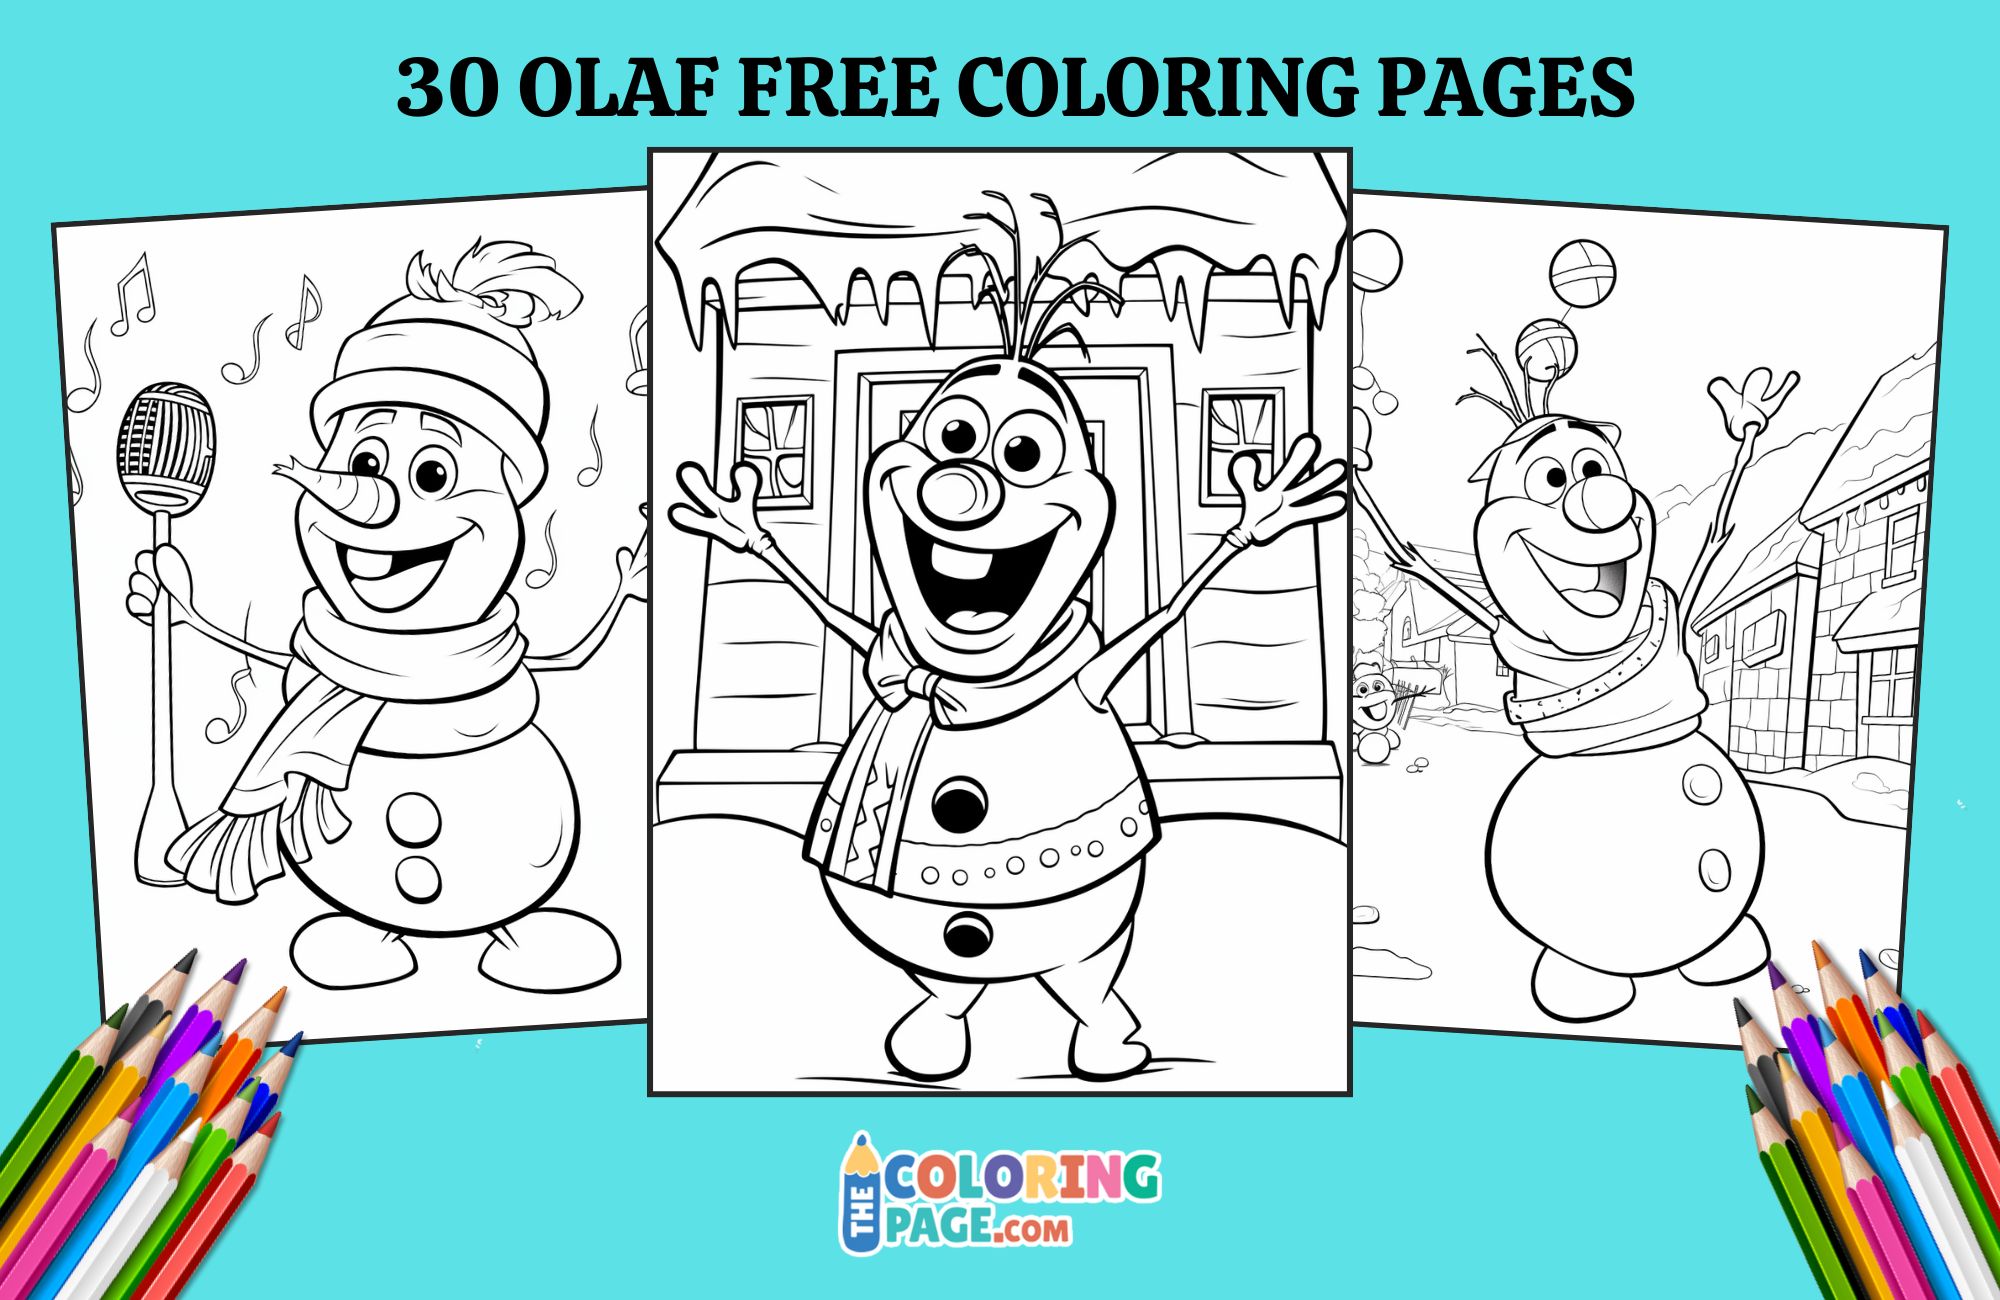 30 Olaf Coloring Pages for kids